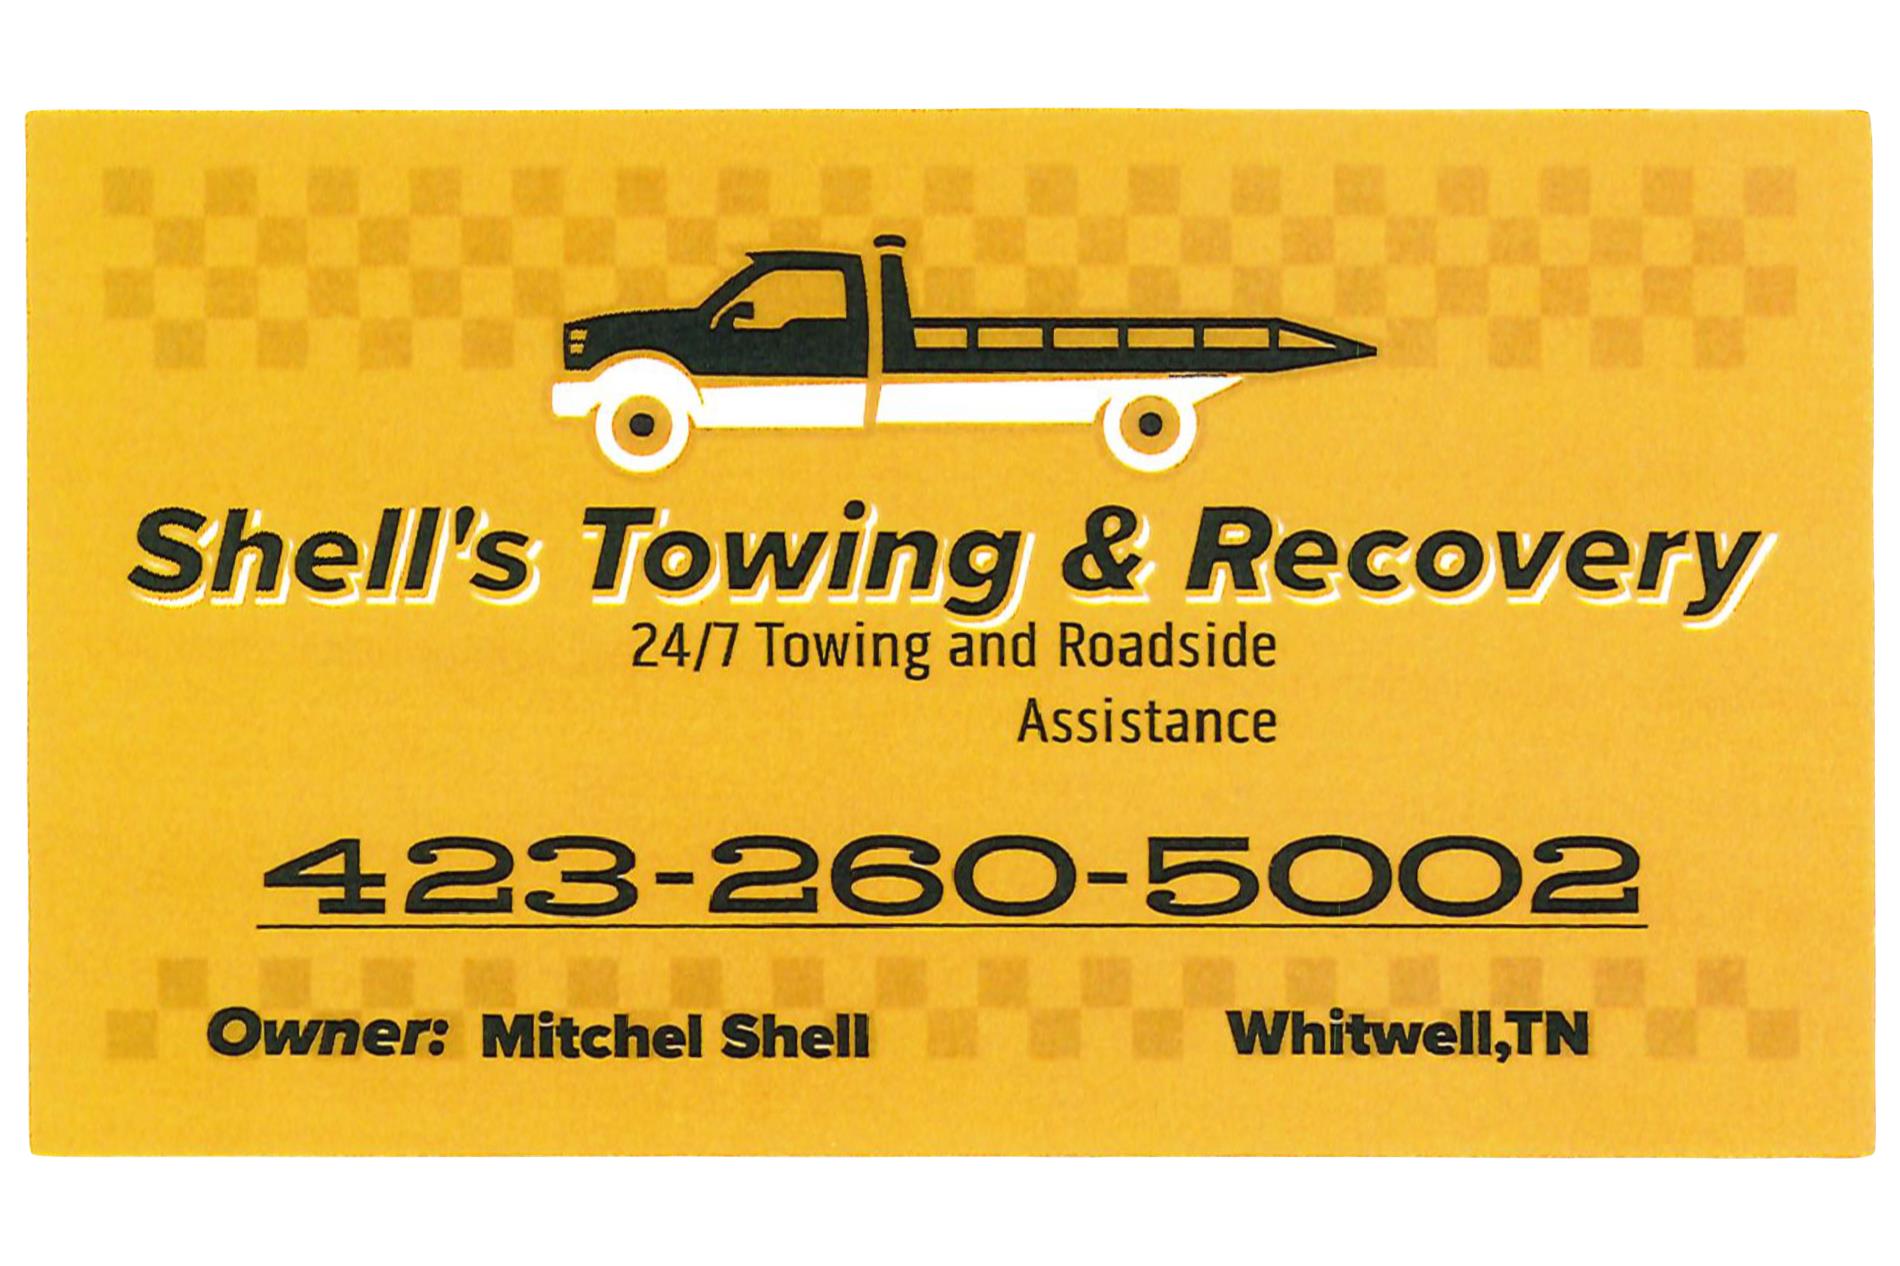 Shell's Towing